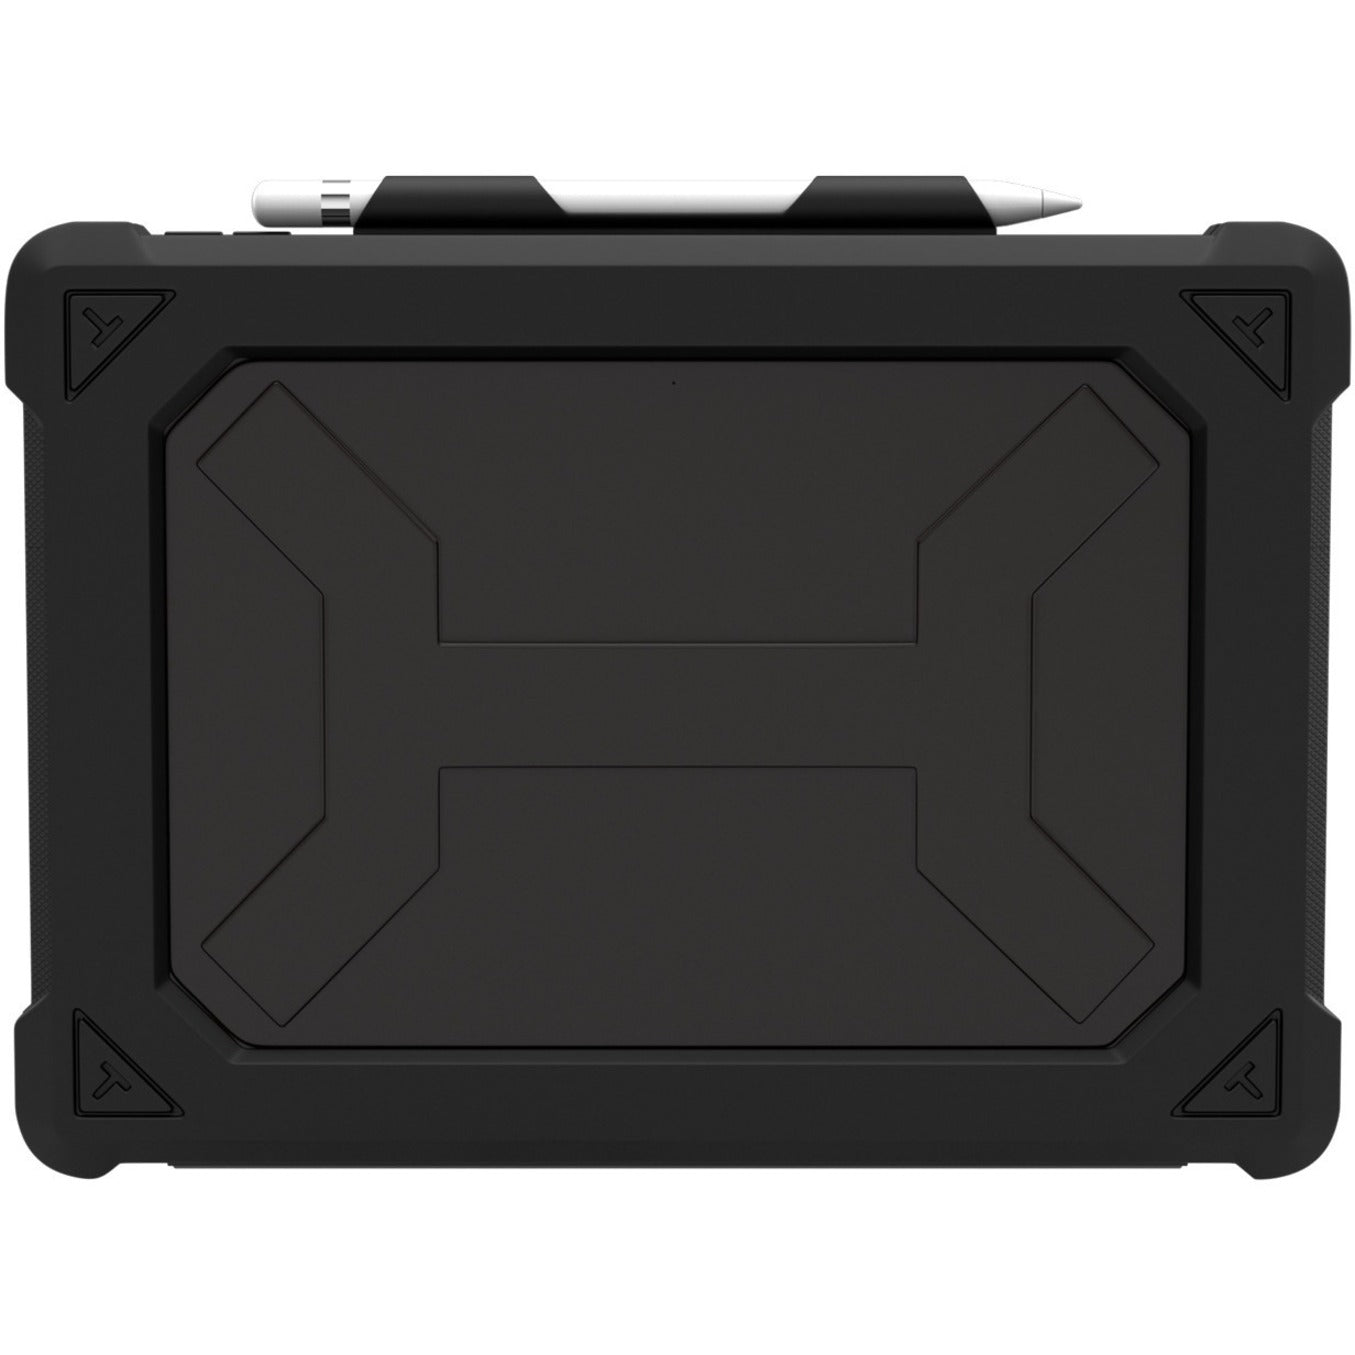 MAXCases Extreme KeyCase Rugged Keyboard/Cover Case for 10.2" Apple iPad (7th Generation) iPad (8th Generation) iPad (9th Generation) Tablet - Black